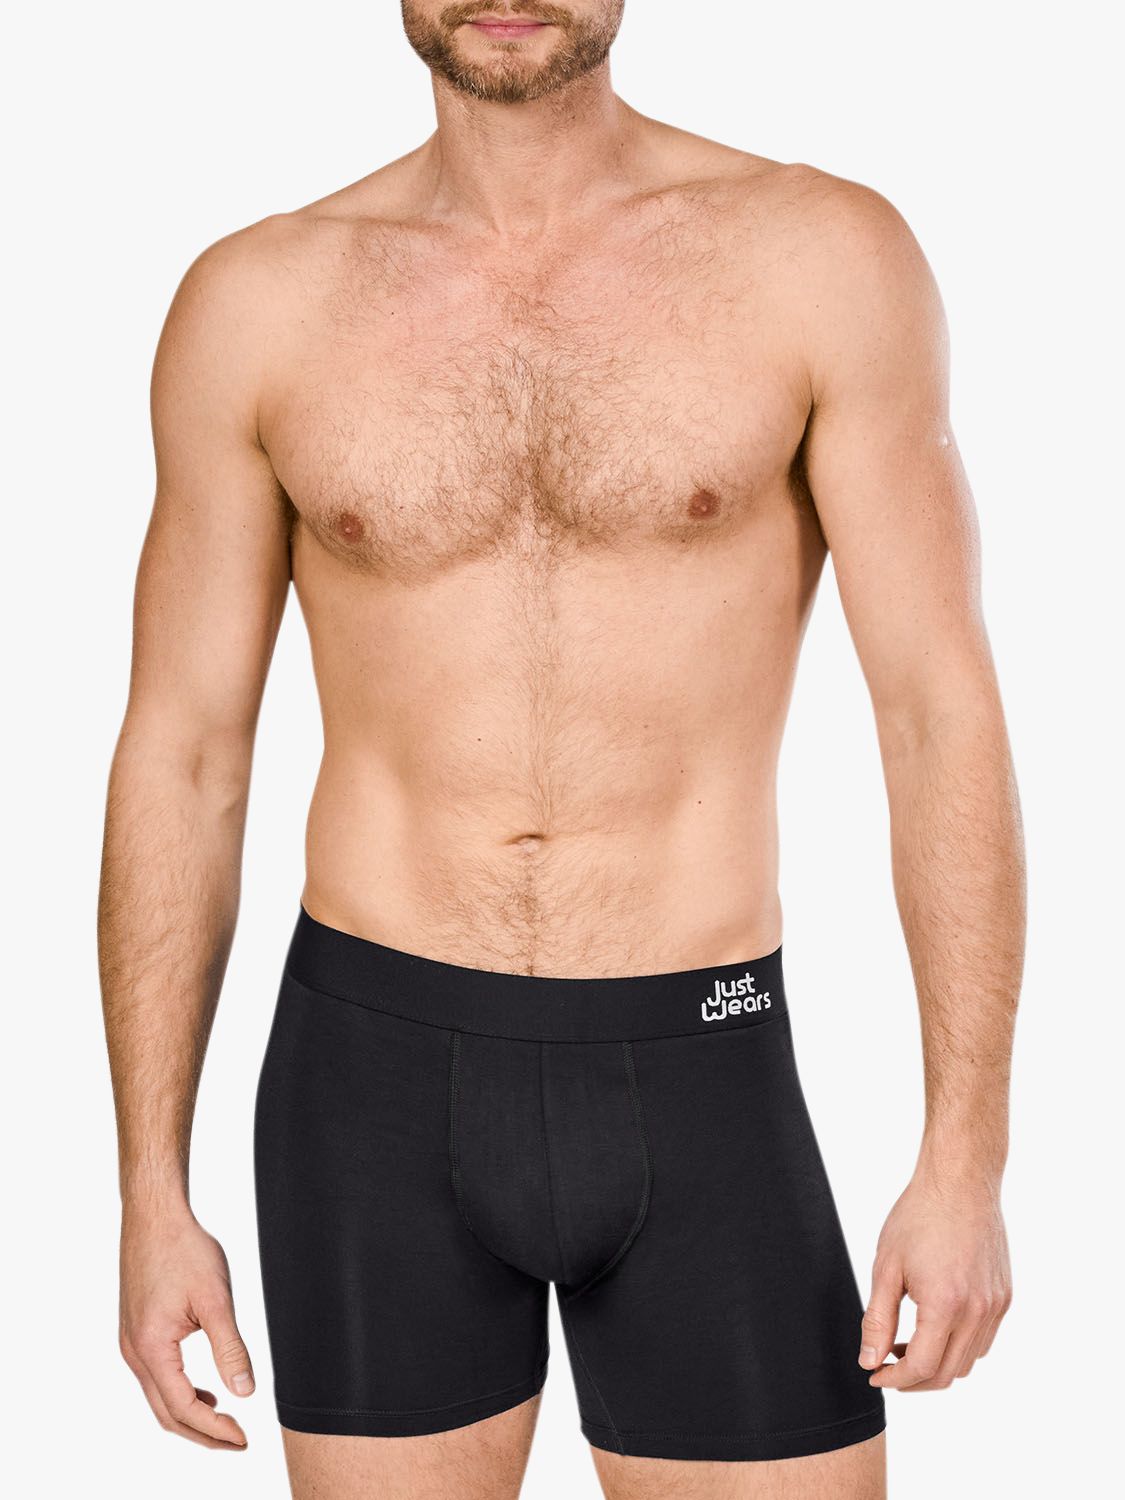 JustWears Pro Boxers, Pack of 3, All Black at John Lewis & Partners